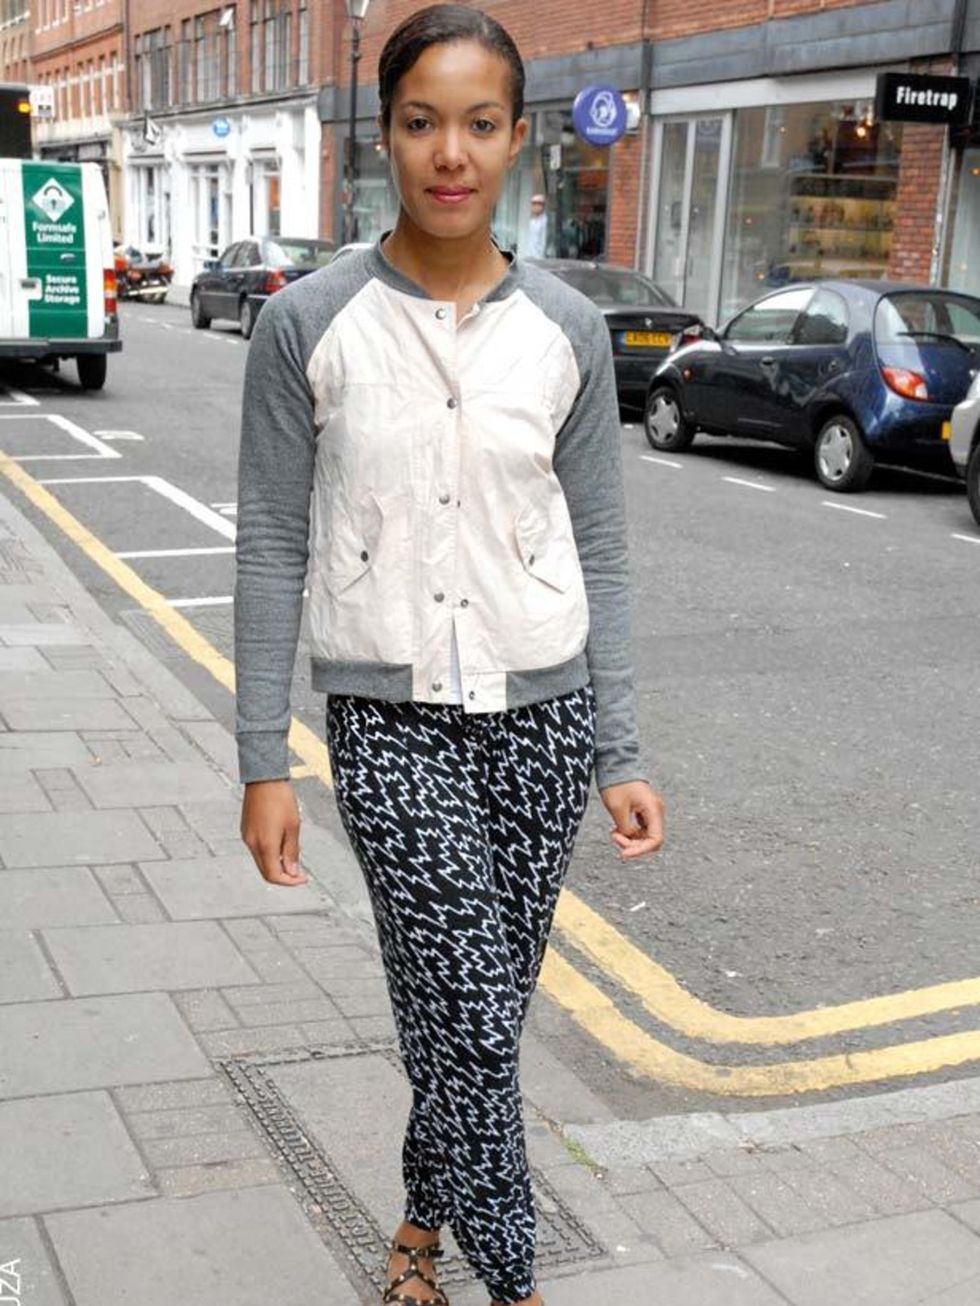 <p>Uju, 32, Personal Trainer. Jacket and trousers Urban Outfitters, Topshop shoes.</p>